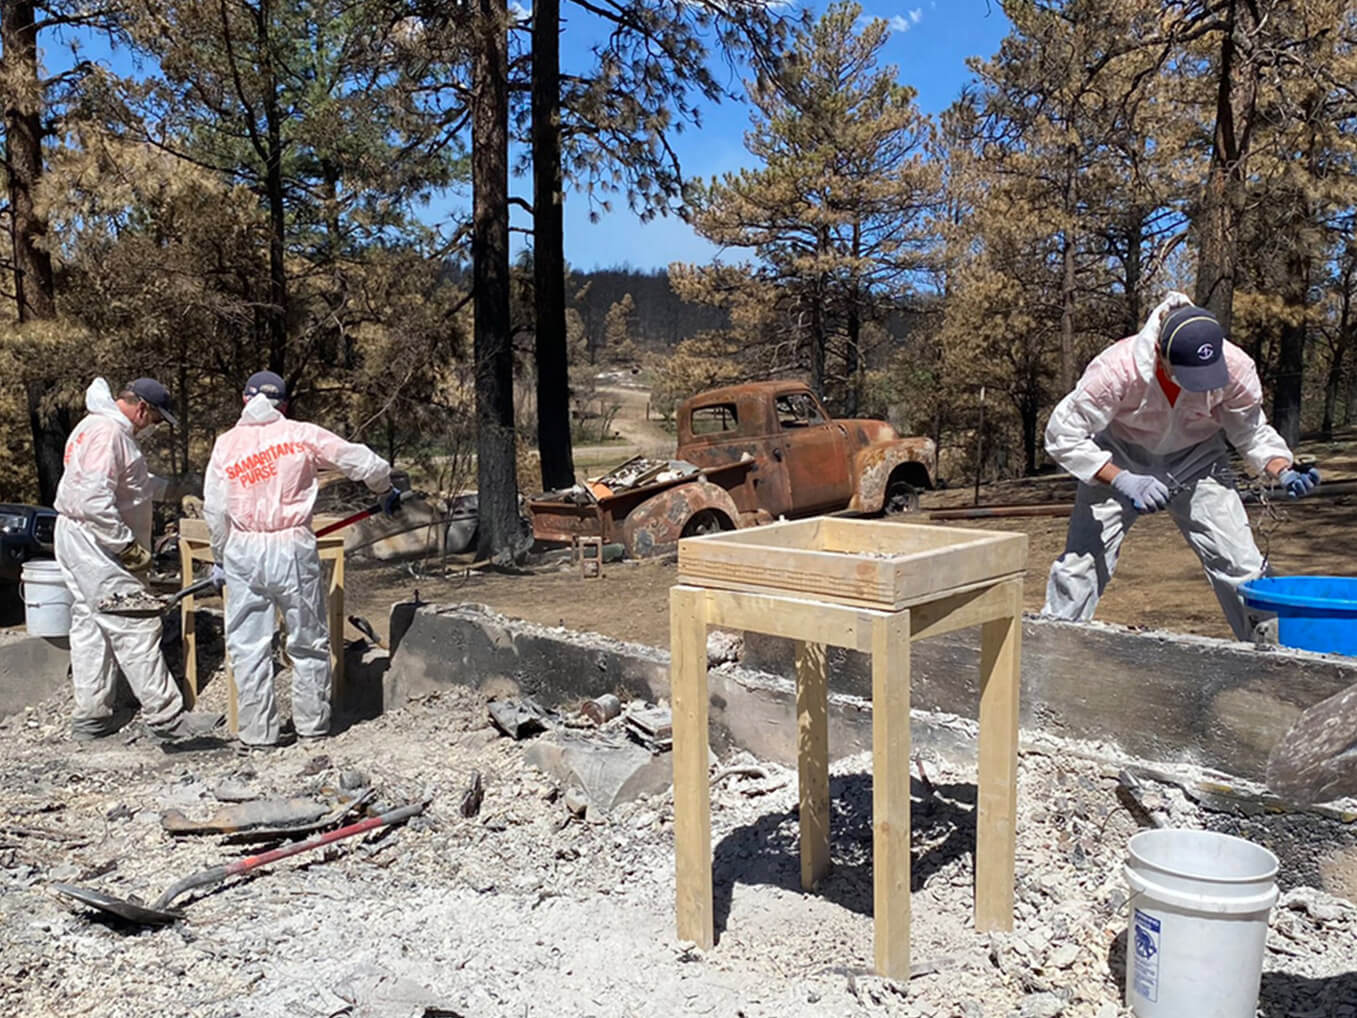 Volunteer teams wear suits and masks as they sift through ashes for homeowners' belongings.